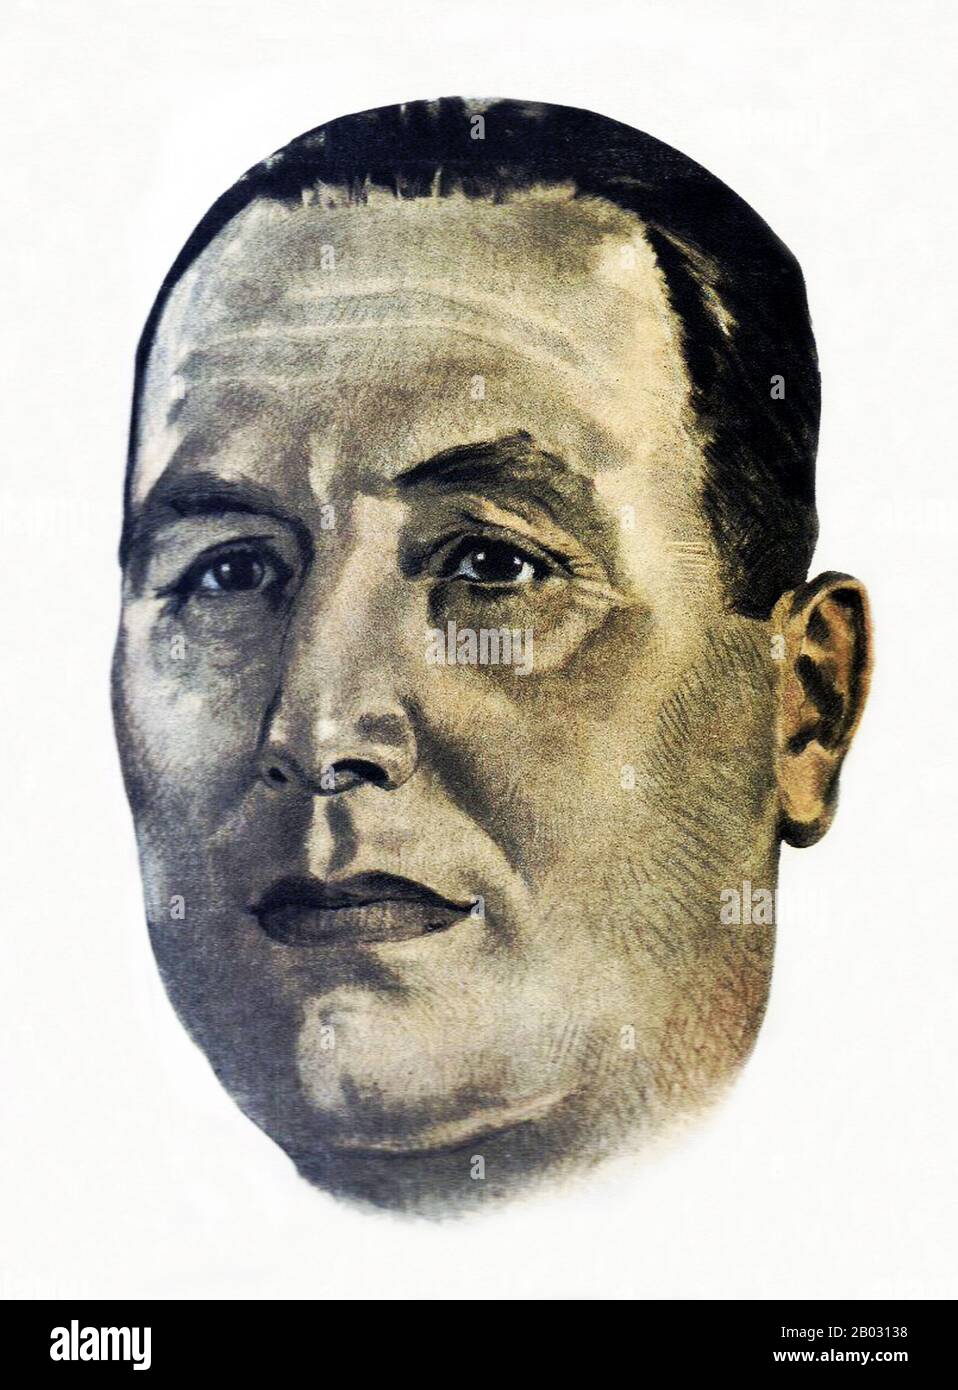 Juan Domingo Peron ( 8 October 1895 – 1 July 1974) was an Argentine military officer and politician.  After serving in several government positions, including those of Minister of Labour and Vice President of the Republic, he was three times elected as President of Argentina, serving from June 1946 to September 1955, when he was overthrown in a coup d'etat, and from October 1973 until his death in July 1974. Stock Photo